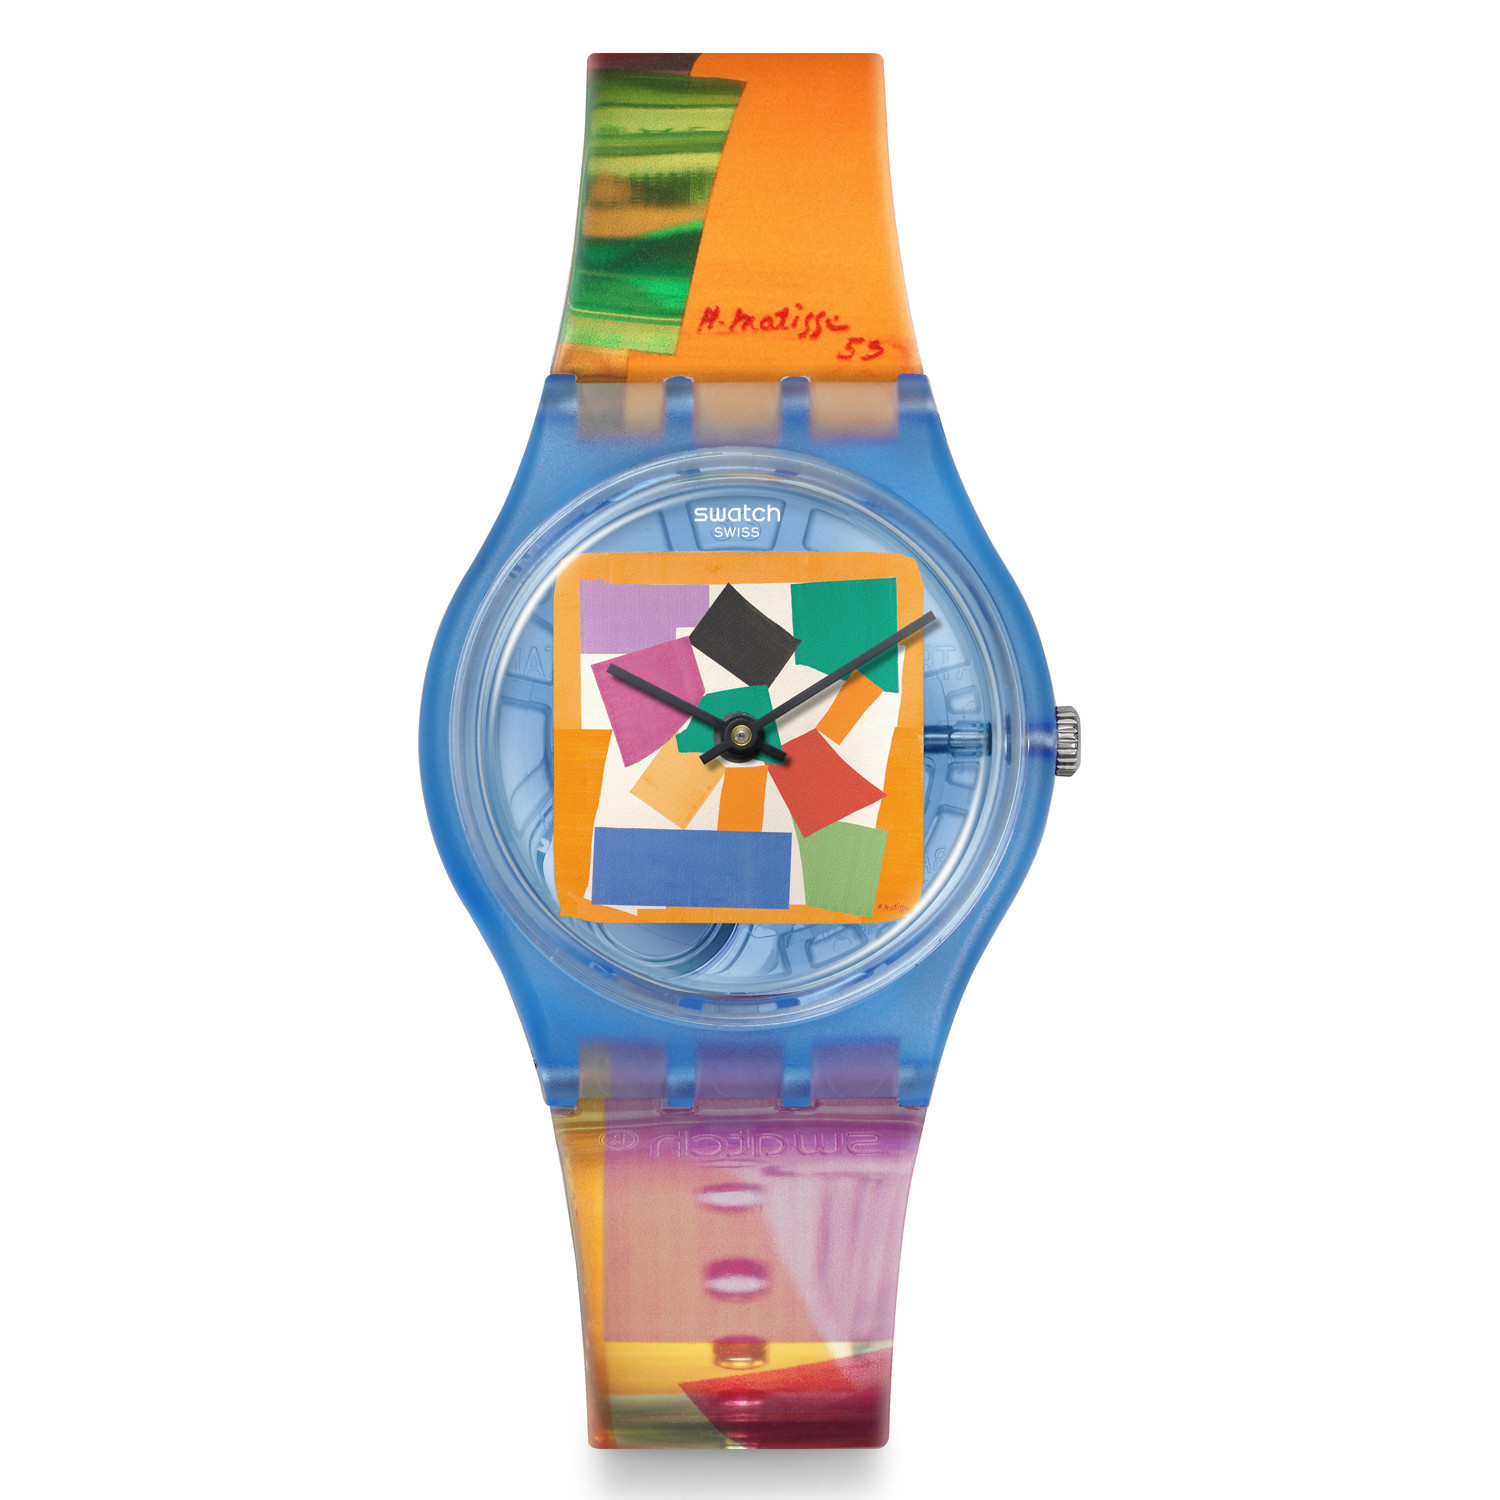 Montre femme Swatch Matisse's Snail
Tate Gallery